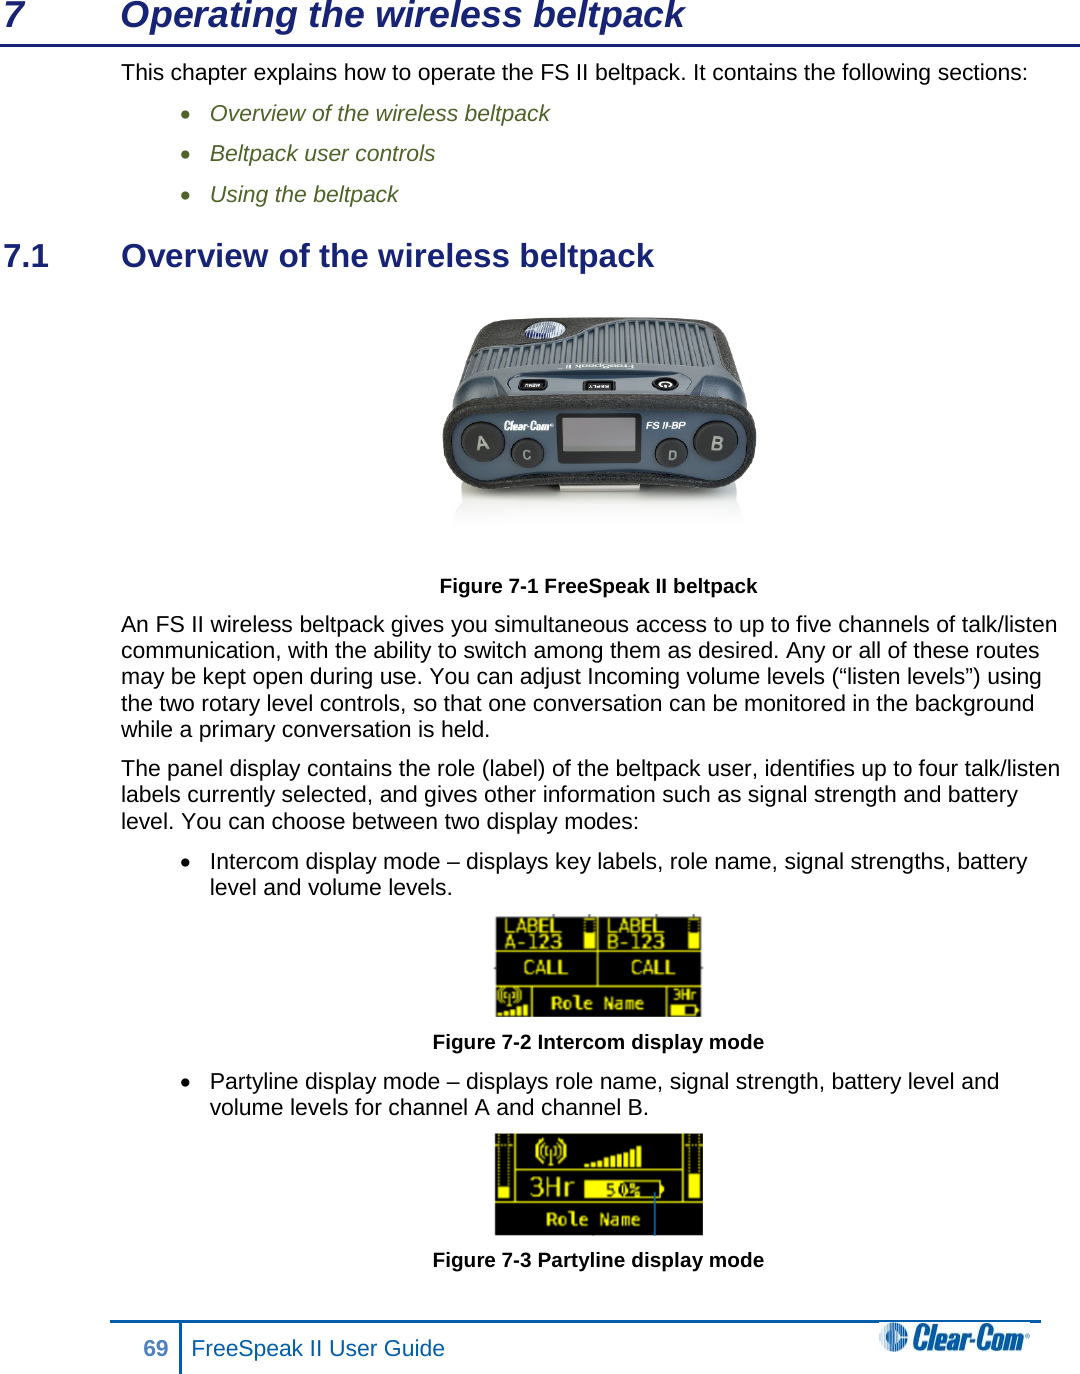 7  Operating the wireless beltpack This chapter explains how to operate the FS II beltpack. It contains the following sections: • Overview of the wireless beltpack • Beltpack user controls • Using the beltpack 7.1  Overview of the wireless beltpack  Figure 7-1 FreeSpeak II beltpack An FS II wireless beltpack gives you simultaneous access to up to five channels of talk/listen communication, with the ability to switch among them as desired. Any or all of these routes may be kept open during use. You can adjust Incoming volume levels (“listen levels”) using the two rotary level controls, so that one conversation can be monitored in the background while a primary conversation is held.  The panel display contains the role (label) of the beltpack user, identifies up to four talk/listen labels currently selected, and gives other information such as signal strength and battery level. You can choose between two display modes: • Intercom display mode – displays key labels, role name, signal strengths, battery level and volume levels.  Figure 7-2 Intercom display mode • Partyline display mode – displays role name, signal strength, battery level and volume levels for channel A and channel B.  Figure 7-3 Partyline display mode 69 FreeSpeak II User Guide  